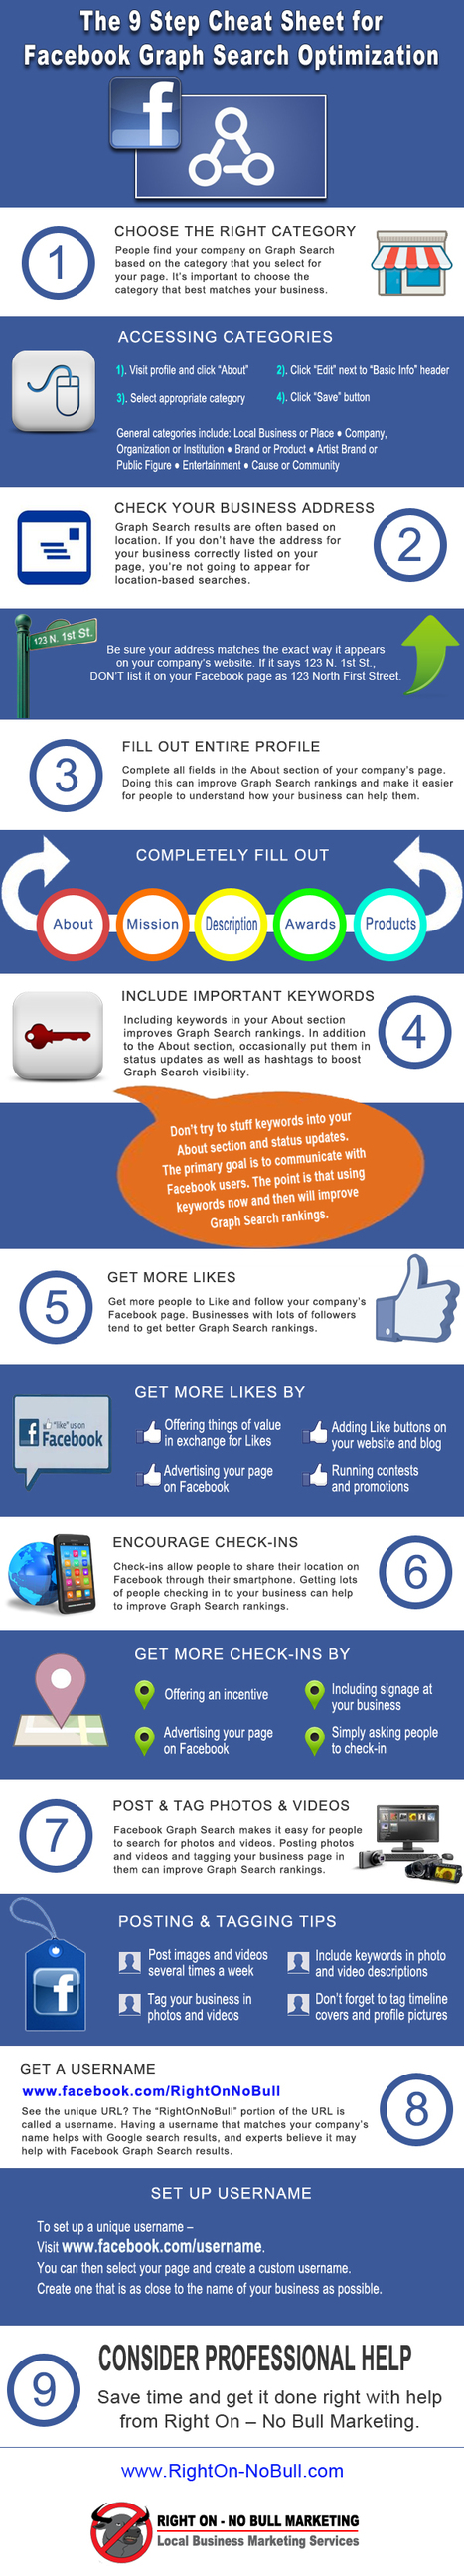 The 9 step cheat sheet for Facebook Graph Optimization | SocialMedia_me | Scoop.it